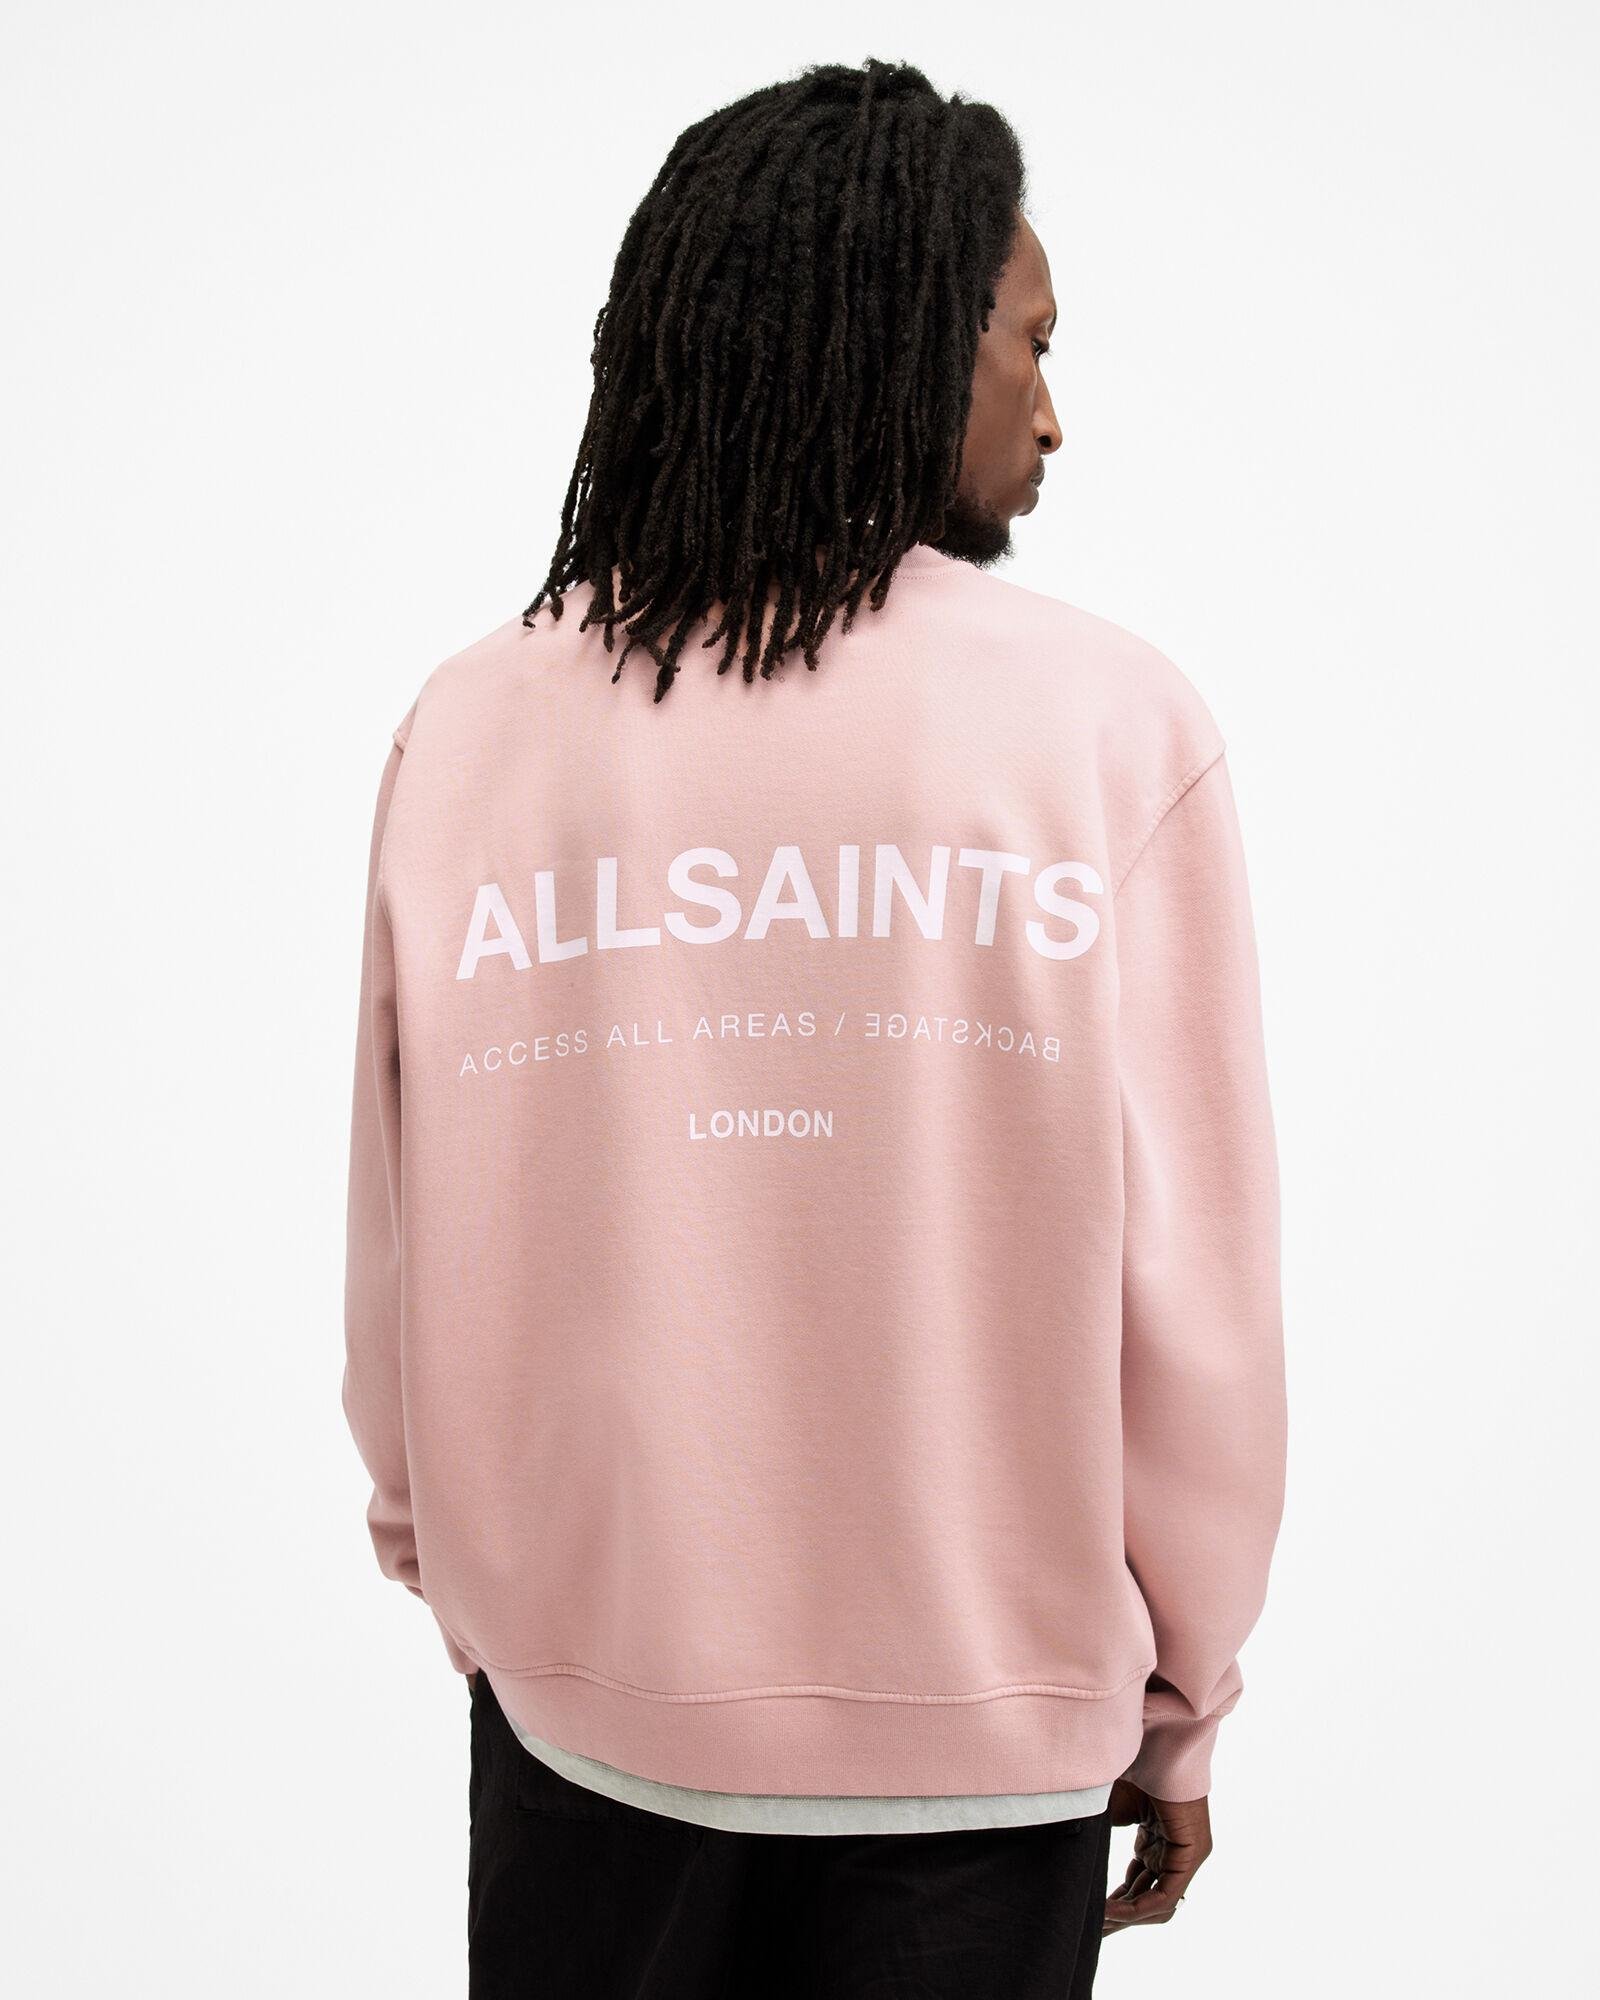 Access Relaxed Fit Crew Neck Sweatshirt by ALLSAINTS